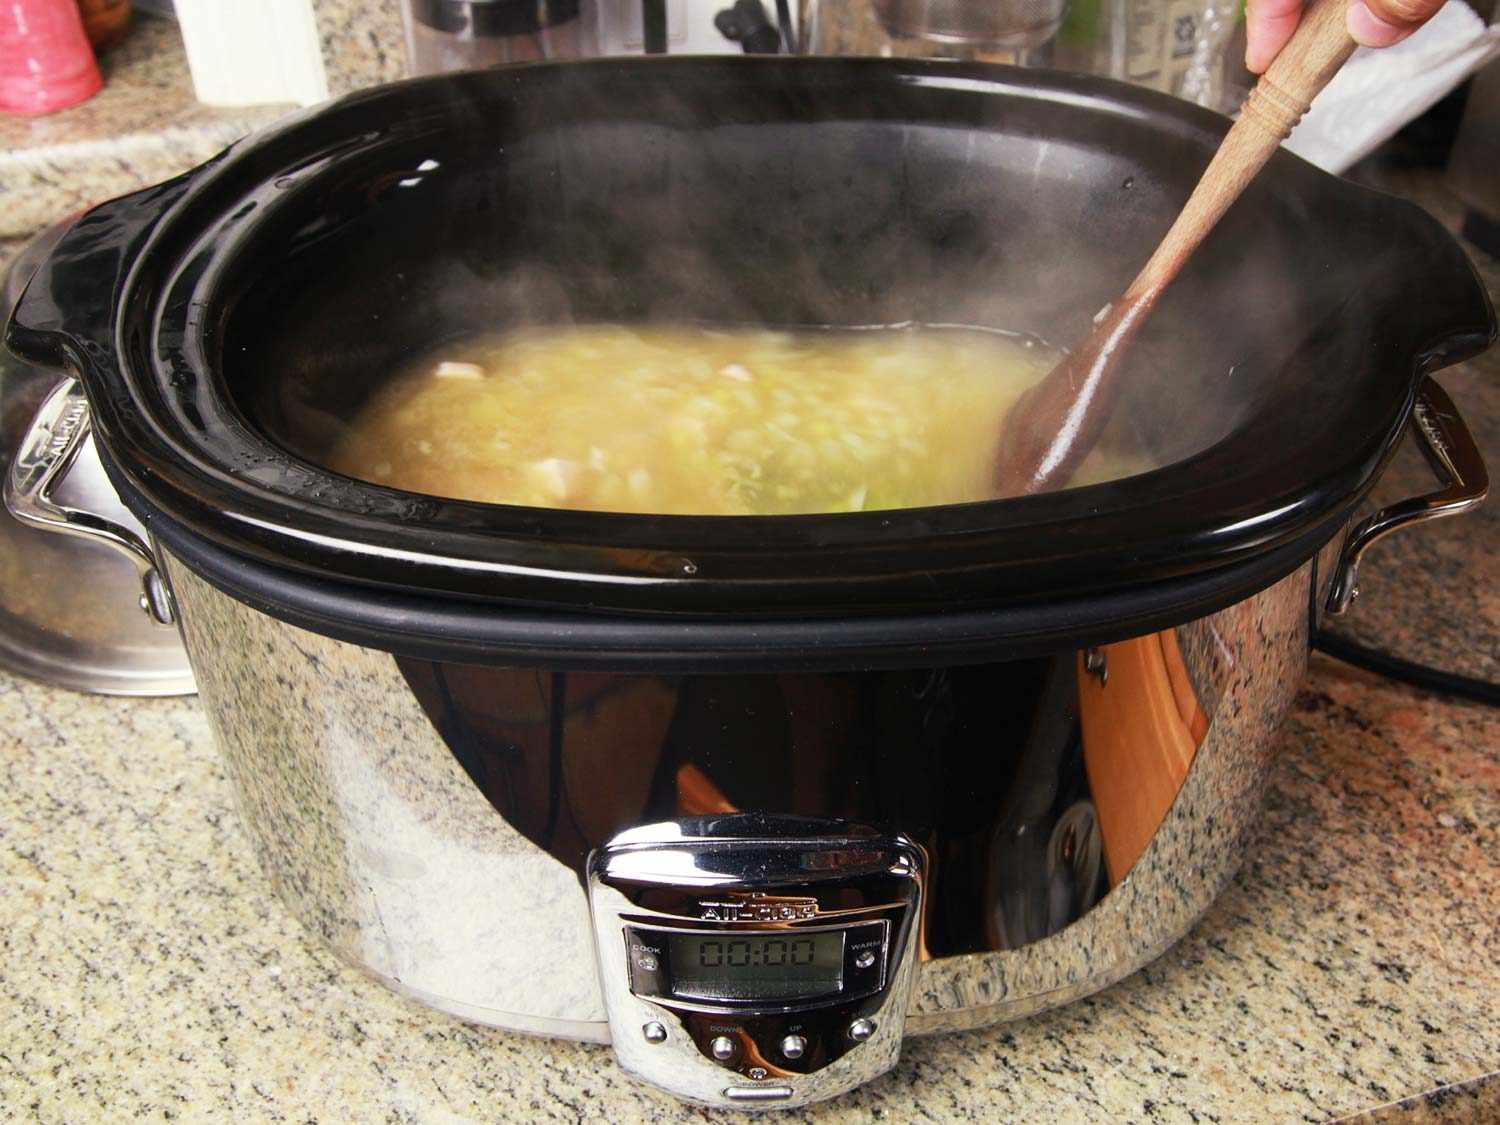 How to Save Your Favorite Crock-Pot Leftovers